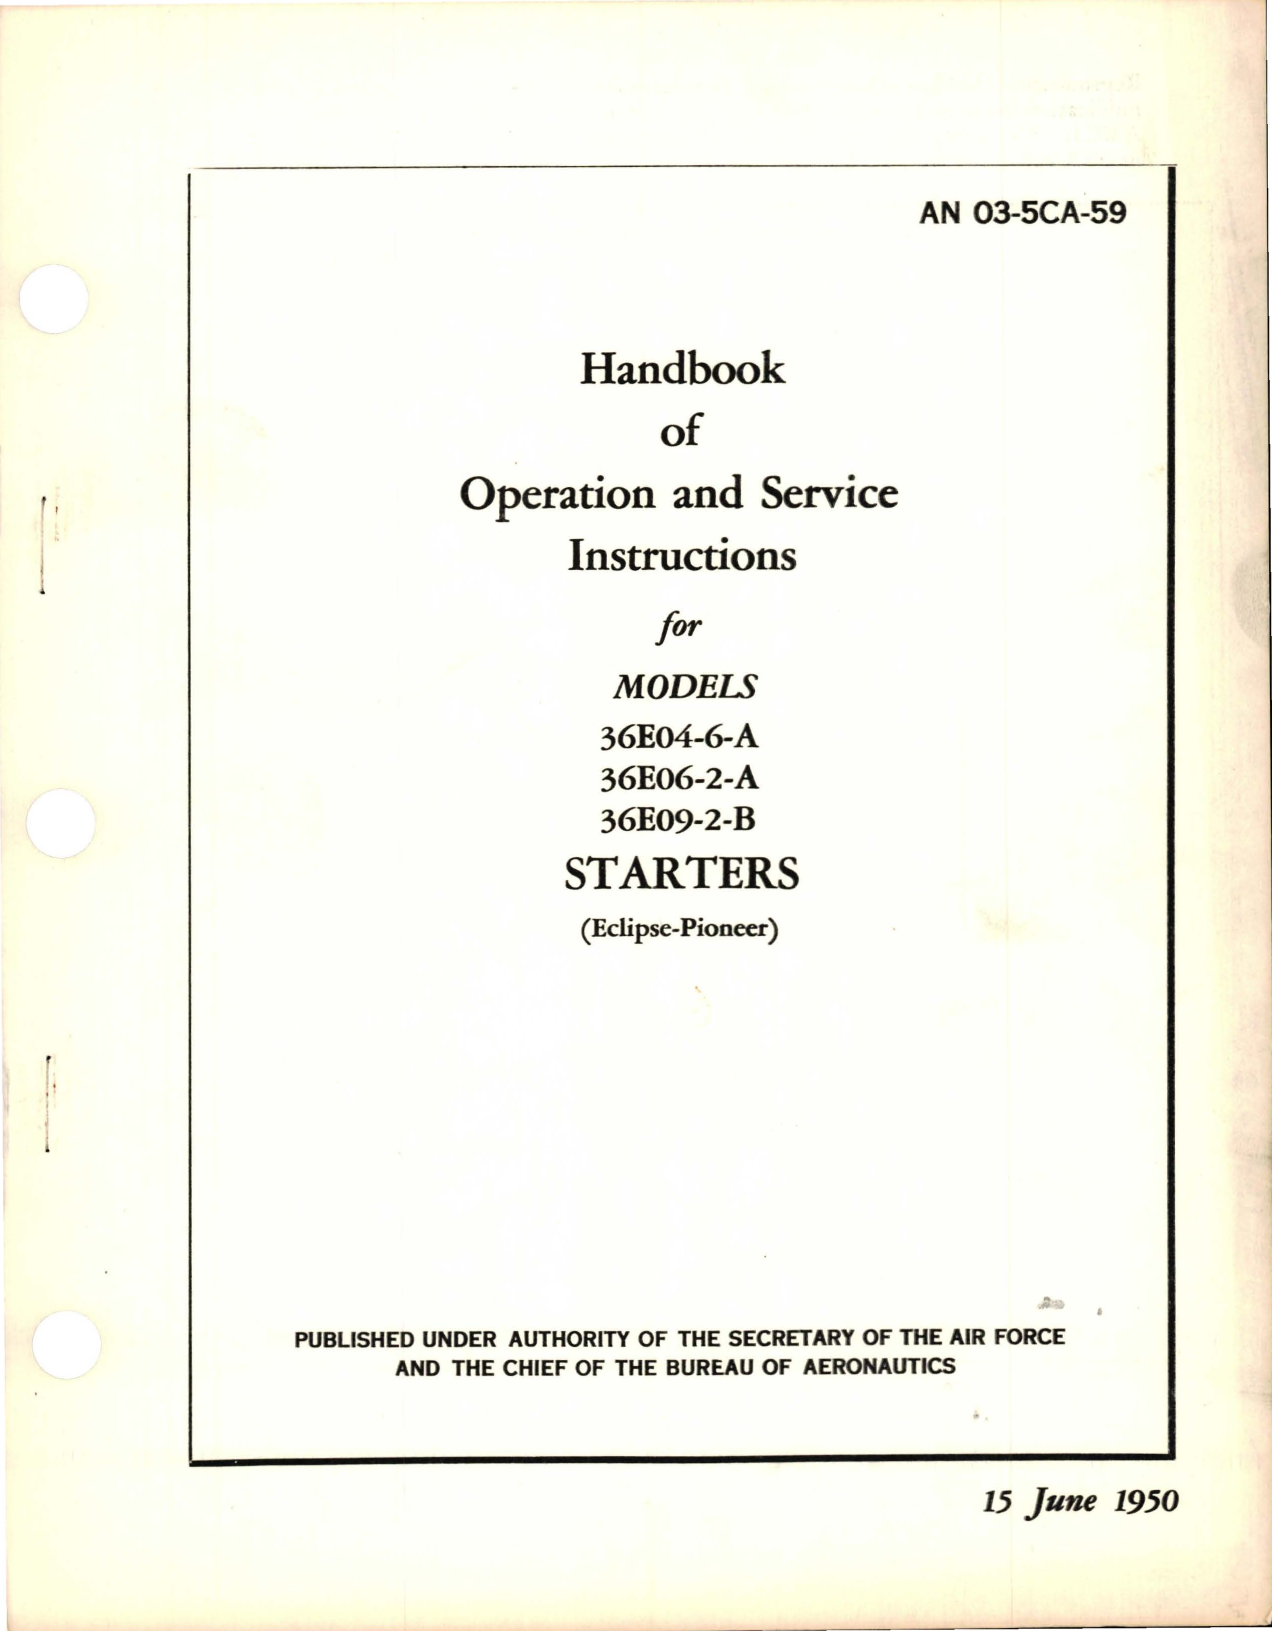 Sample page 1 from AirCorps Library document: Operation and Service Instructions for Starters - Models 36E04-6-A, 36E06-2-A, and 36E09-2-B